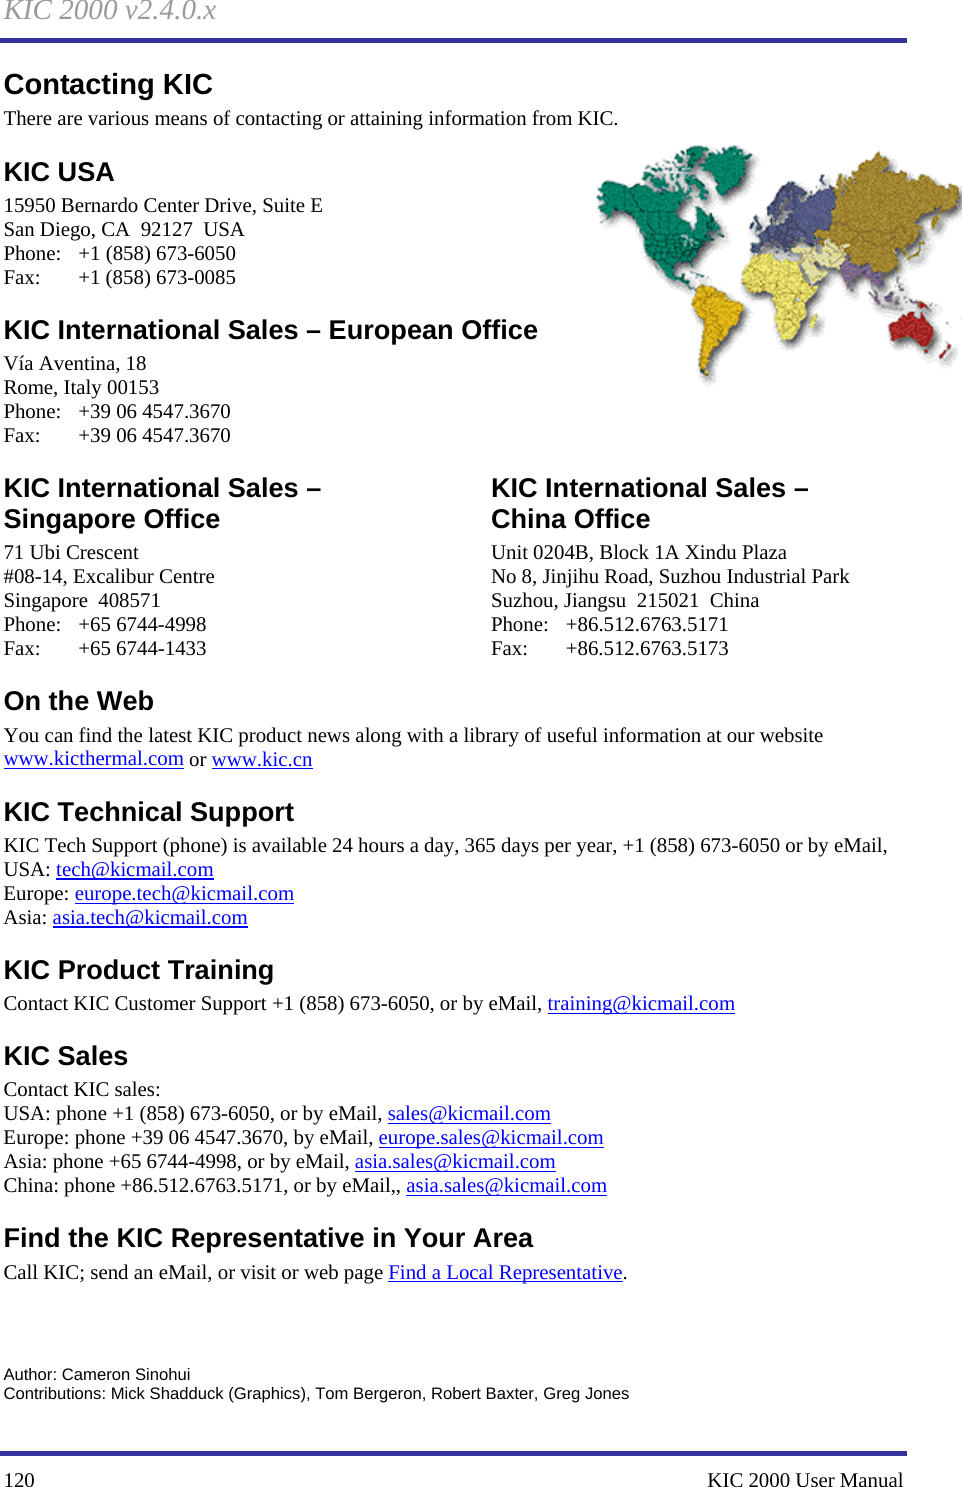 KIC 2000 v2.4.0.x 120    KIC 2000 User Manual Contacting KIC There are various means of contacting or attaining information from KIC. KIC USA  15950 Bernardo Center Drive, Suite E San Diego, CA  92127  USA Phone:  +1 (858) 673-6050 Fax:  +1 (858) 673-0085 KIC International Sales – European Office Vía Aventina, 18 Rome, Italy 00153 Phone: +39 06 4547.3670 Fax: +39 06 4547.3670 KIC International Sales – Singapore Office 71 Ubi Crescent #08-14, Excalibur Centre Singapore  408571 Phone: +65 6744-4998 Fax: +65 6744-1433 KIC International Sales –  China Office Unit 0204B, Block 1A Xindu Plaza No 8, Jinjihu Road, Suzhou Industrial Park Suzhou, Jiangsu  215021  China Phone: +86.512.6763.5171 Fax: +86.512.6763.5173 On the Web You can find the latest KIC product news along with a library of useful information at our website www.kicthermal.com or www.kic.cn KIC Technical Support KIC Tech Support (phone) is available 24 hours a day, 365 days per year, +1 (858) 673-6050 or by eMail, USA: tech@kicmail.com Europe: europe.tech@kicmail.com Asia: asia.tech@kicmail.com KIC Product Training Contact KIC Customer Support +1 (858) 673-6050, or by eMail, training@kicmail.com KIC Sales Contact KIC sales: USA: phone +1 (858) 673-6050, or by eMail, sales@kicmail.com Europe: phone +39 06 4547.3670, by eMail, europe.sales@kicmail.com Asia: phone +65 6744-4998, or by eMail, asia.sales@kicmail.com China: phone +86.512.6763.5171, or by eMail,, asia.sales@kicmail.com Find the KIC Representative in Your Area Call KIC; send an eMail, or visit or web page Find a Local Representative.     Author: Cameron Sinohui Contributions: Mick Shadduck (Graphics), Tom Bergeron, Robert Baxter, Greg Jones 